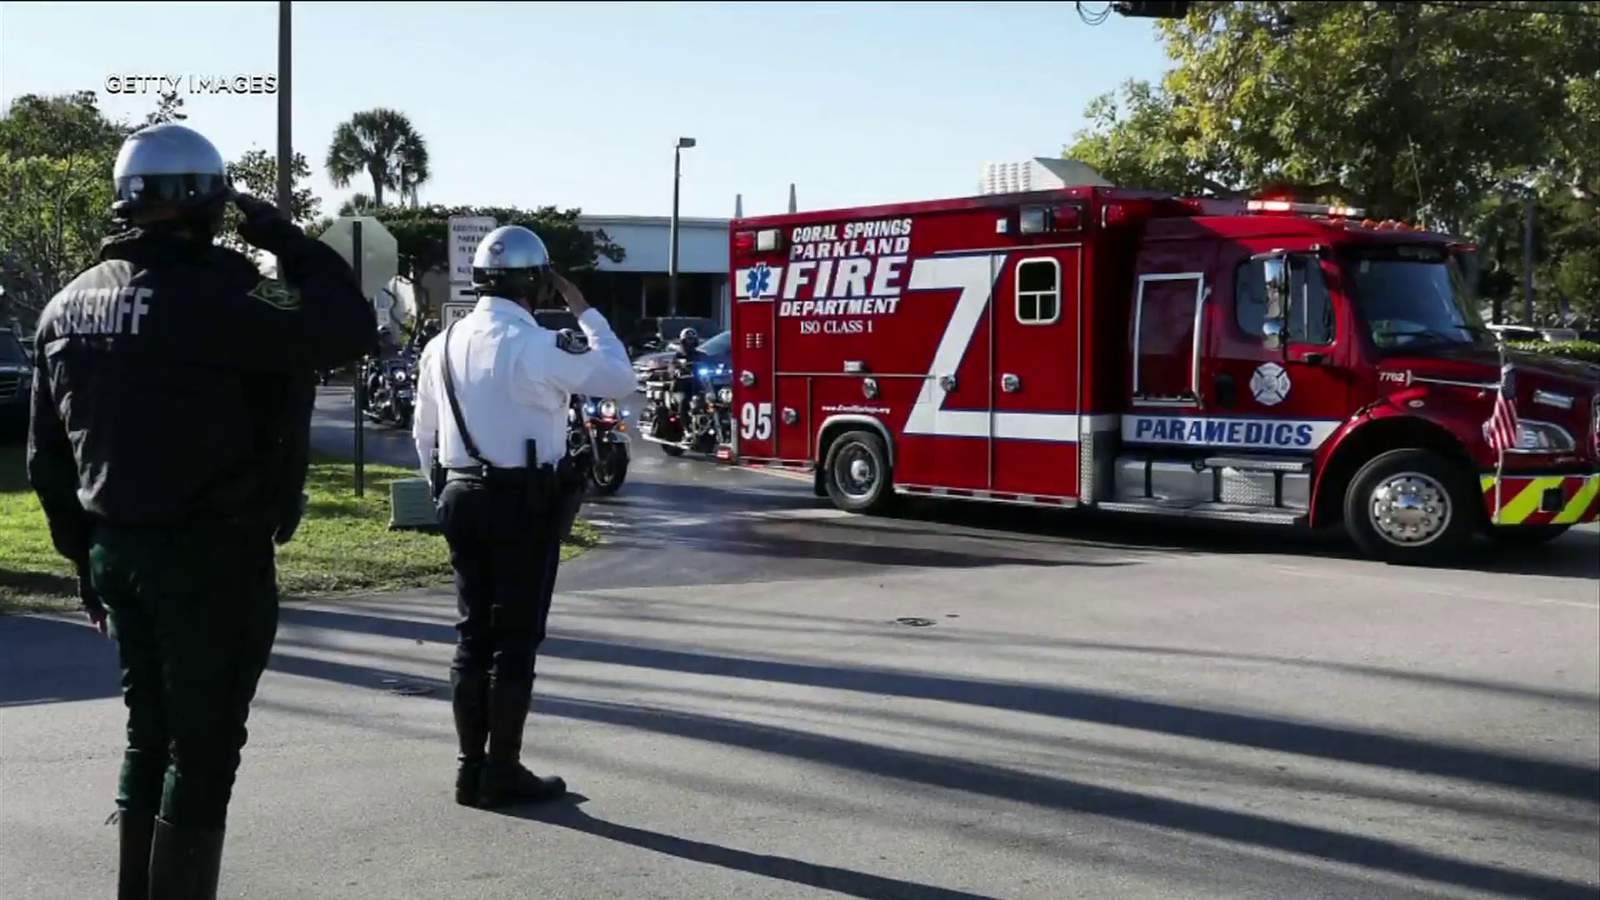 FBI: 2 agents killed, 3 wounded, suspect dead in South Florida